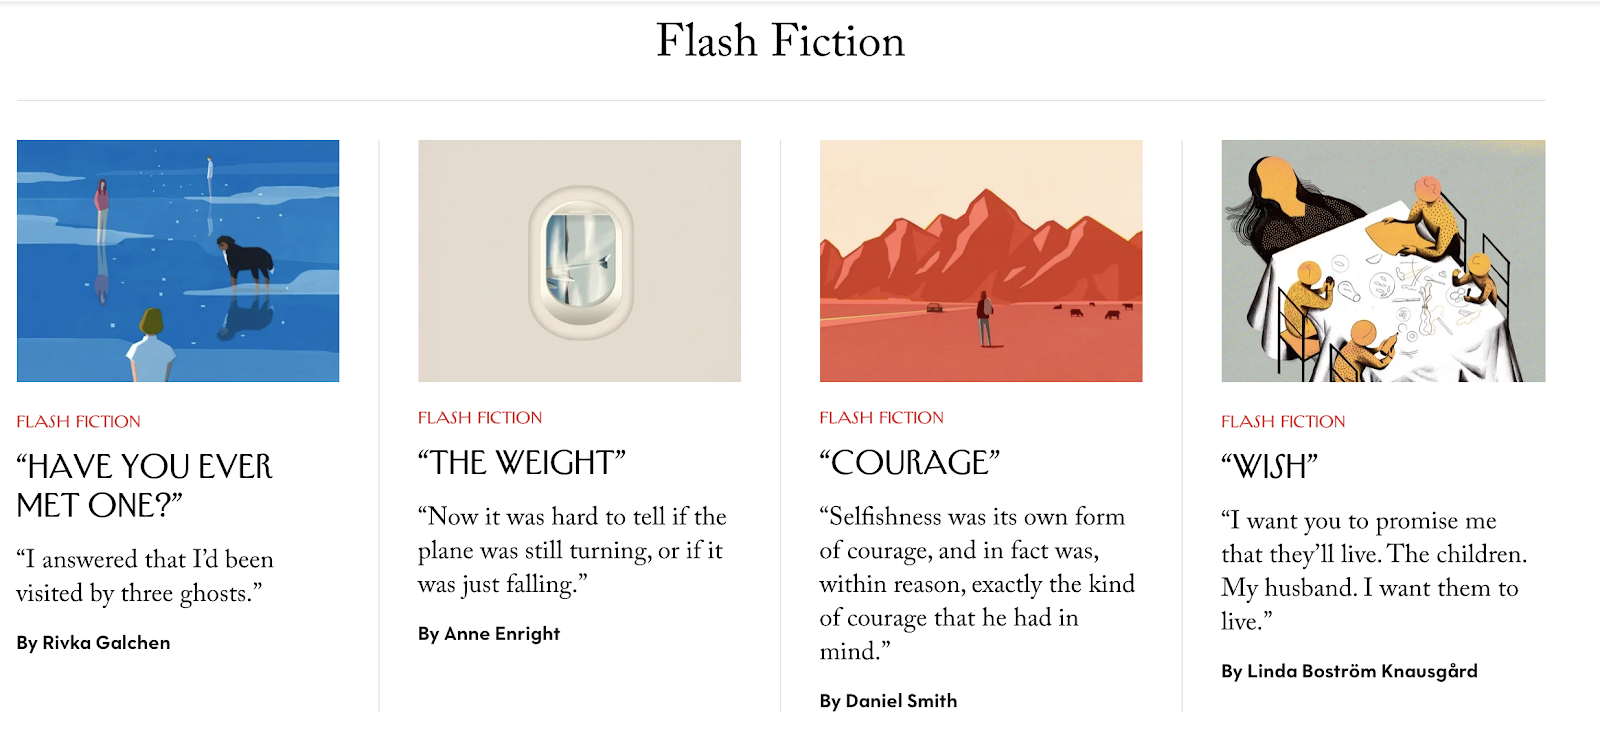 The New Yorker Story Headlines That Entice Readers to Click